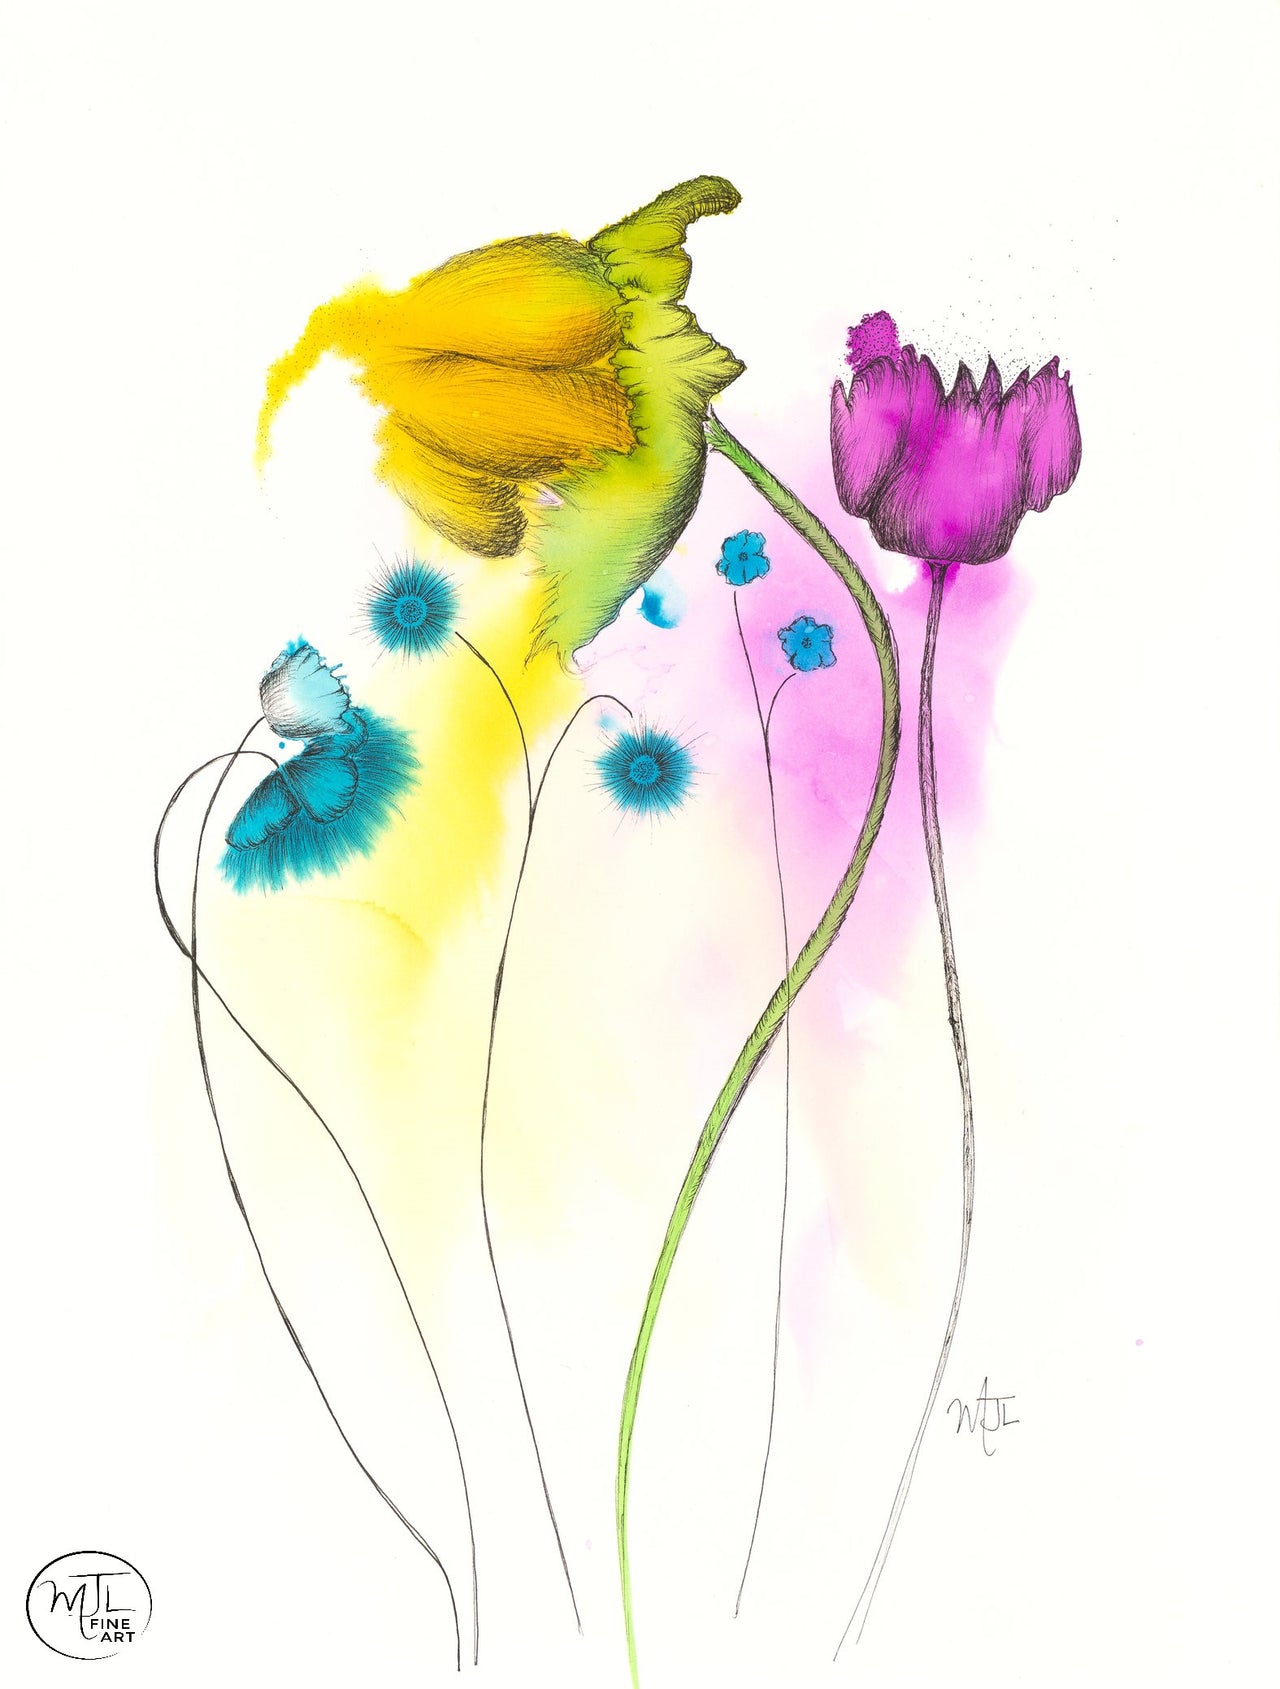 basking a variety of flowers in vibrant watercolor original art with ink sketch overlay prints